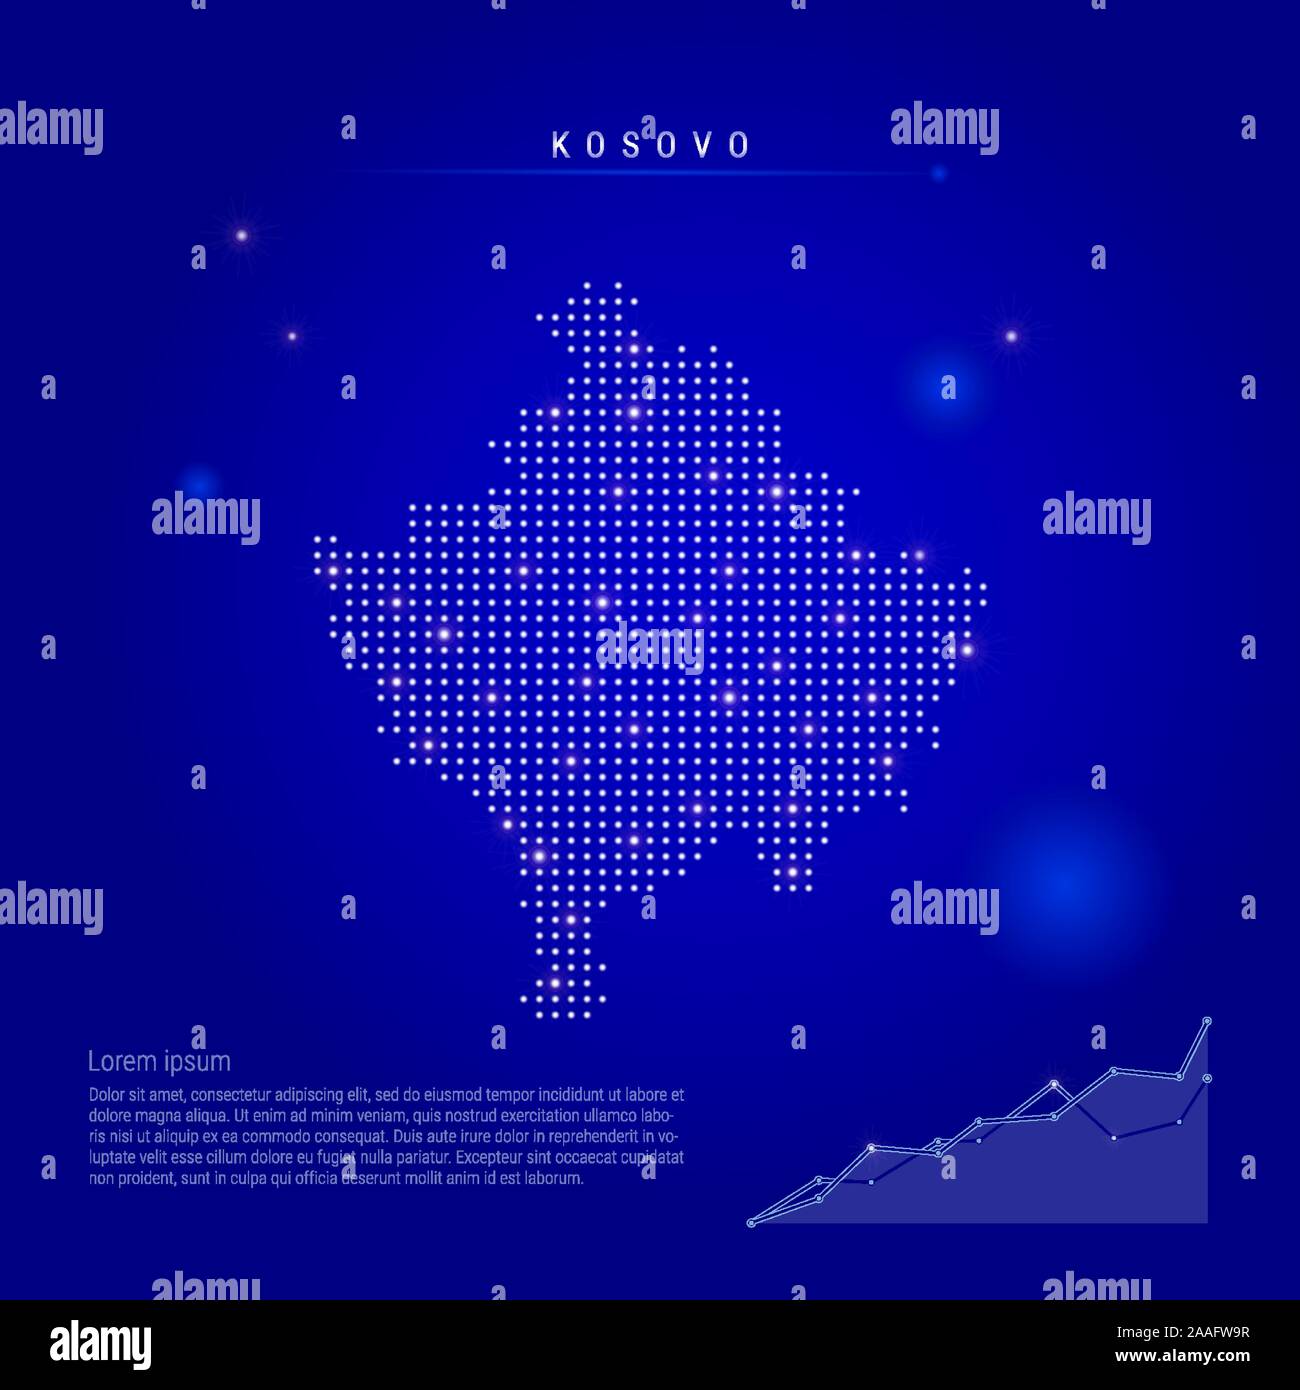 Kosovo illuminated map with glowing dots. Infographics elements. Dark blue space background. Vector illustration. Growing chart, lorem ipsum text. Stock Vector